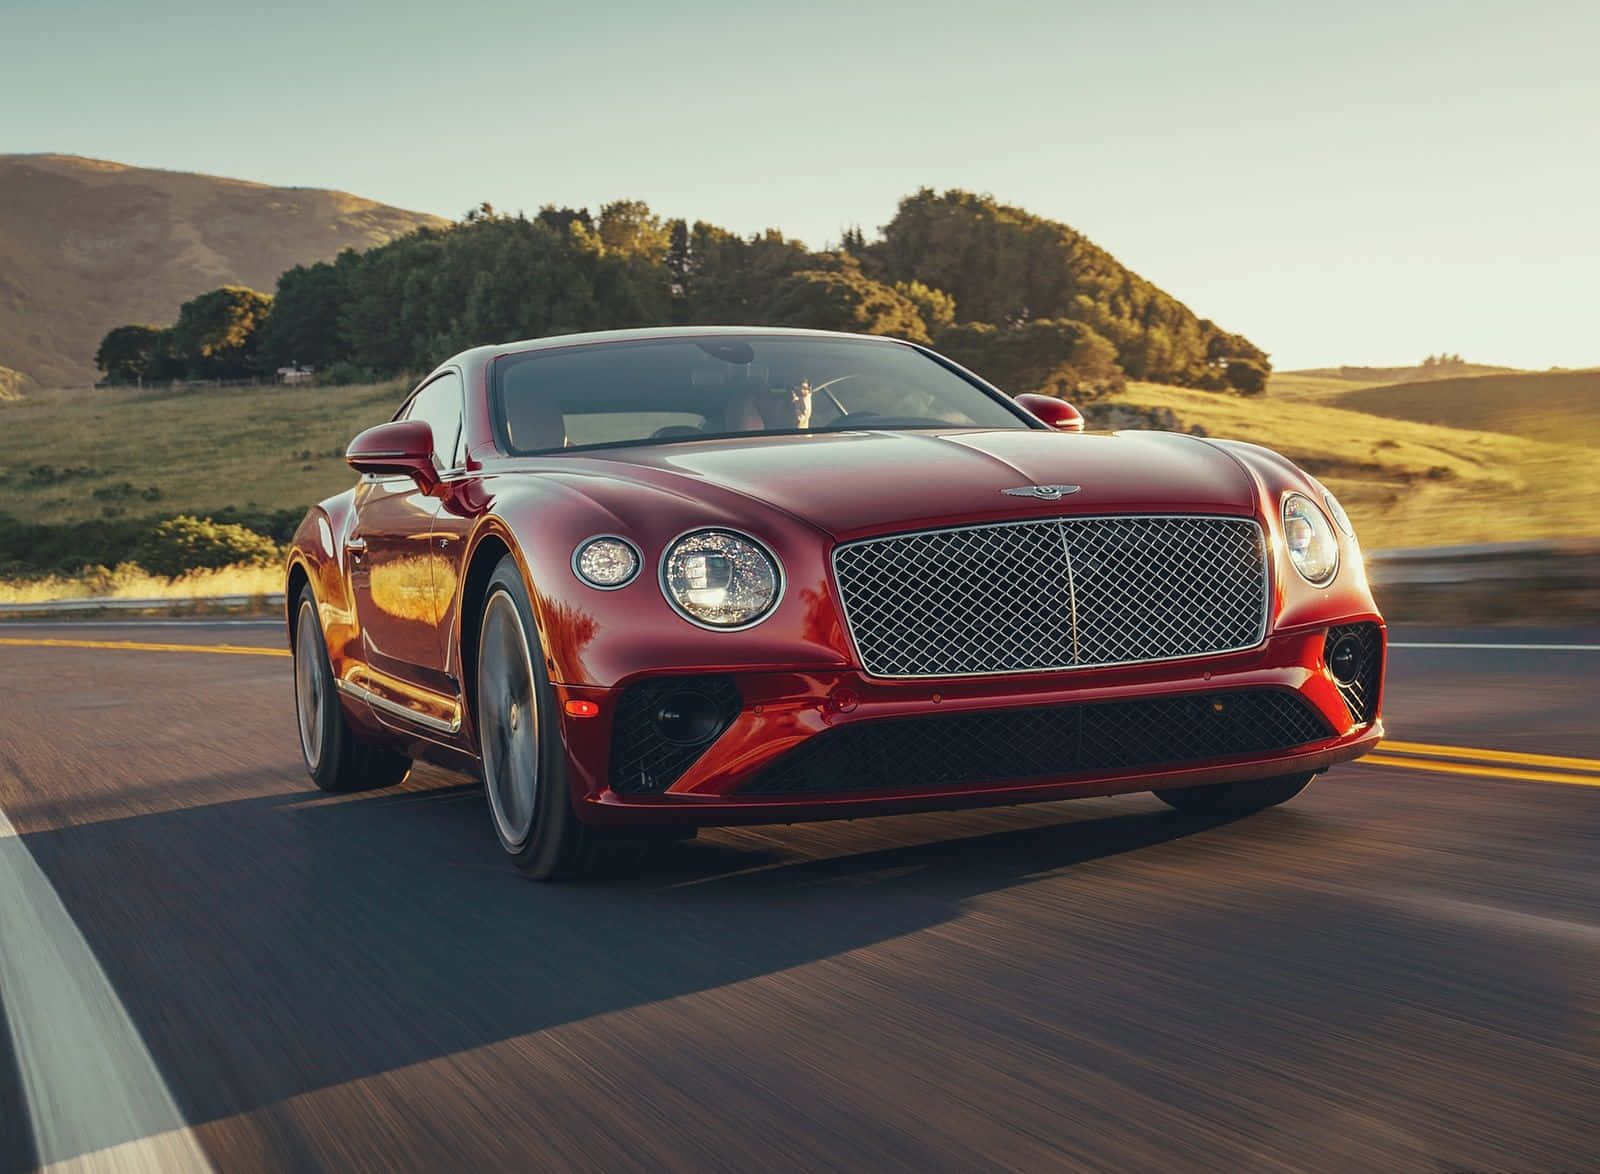 The Red Bentley Continental Gt Is Driving Down A Road